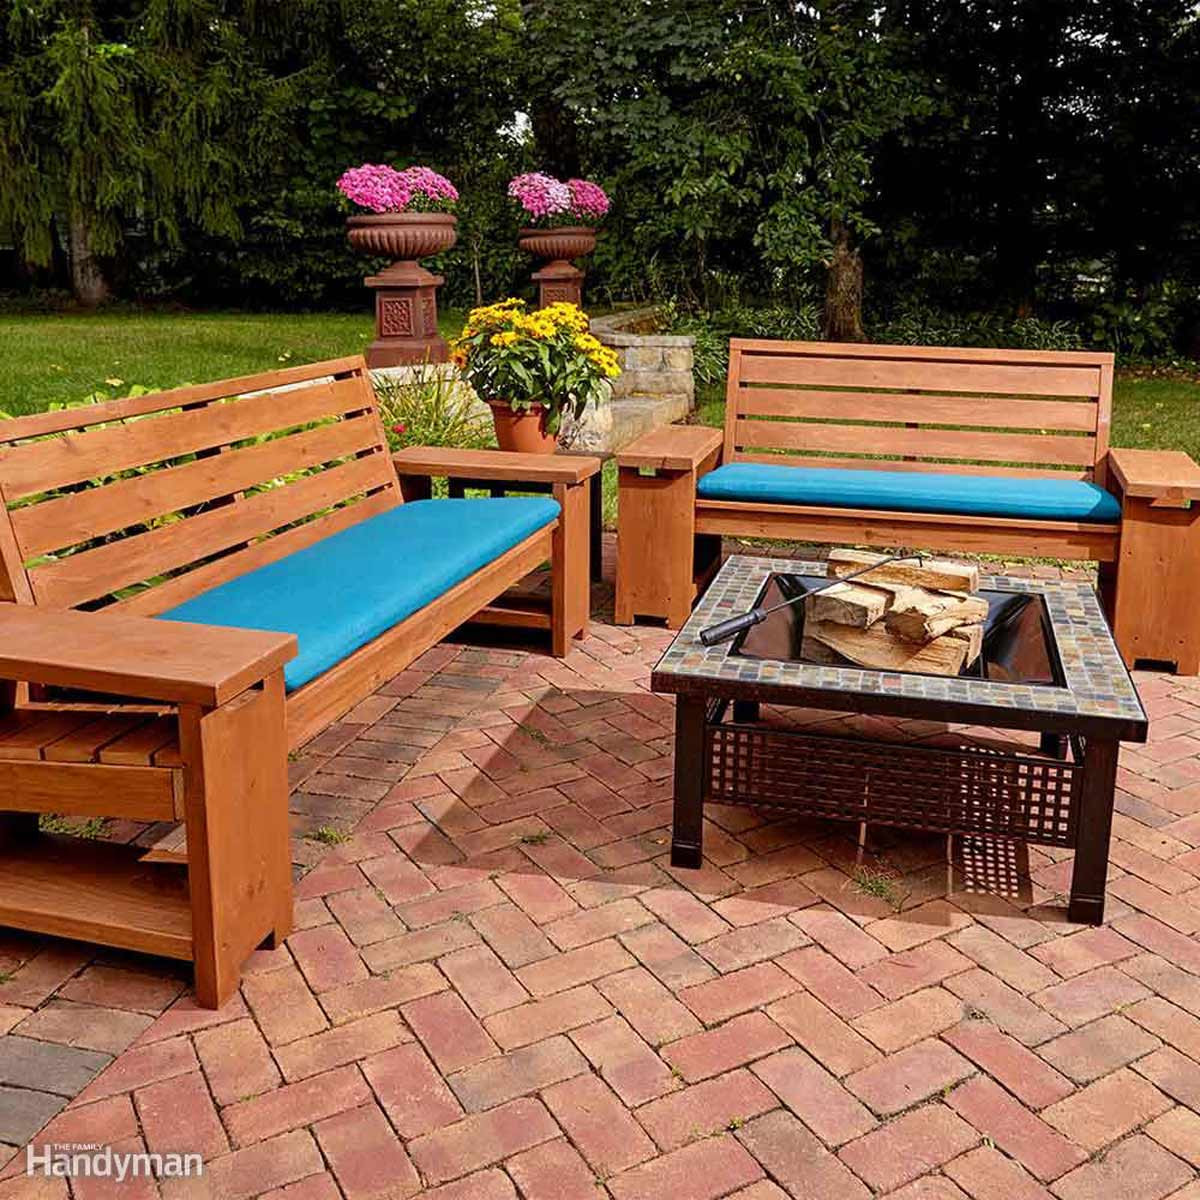 DIY Outdoor Wooden Benches
 15 Awesome Plans for DIY Patio Furniture